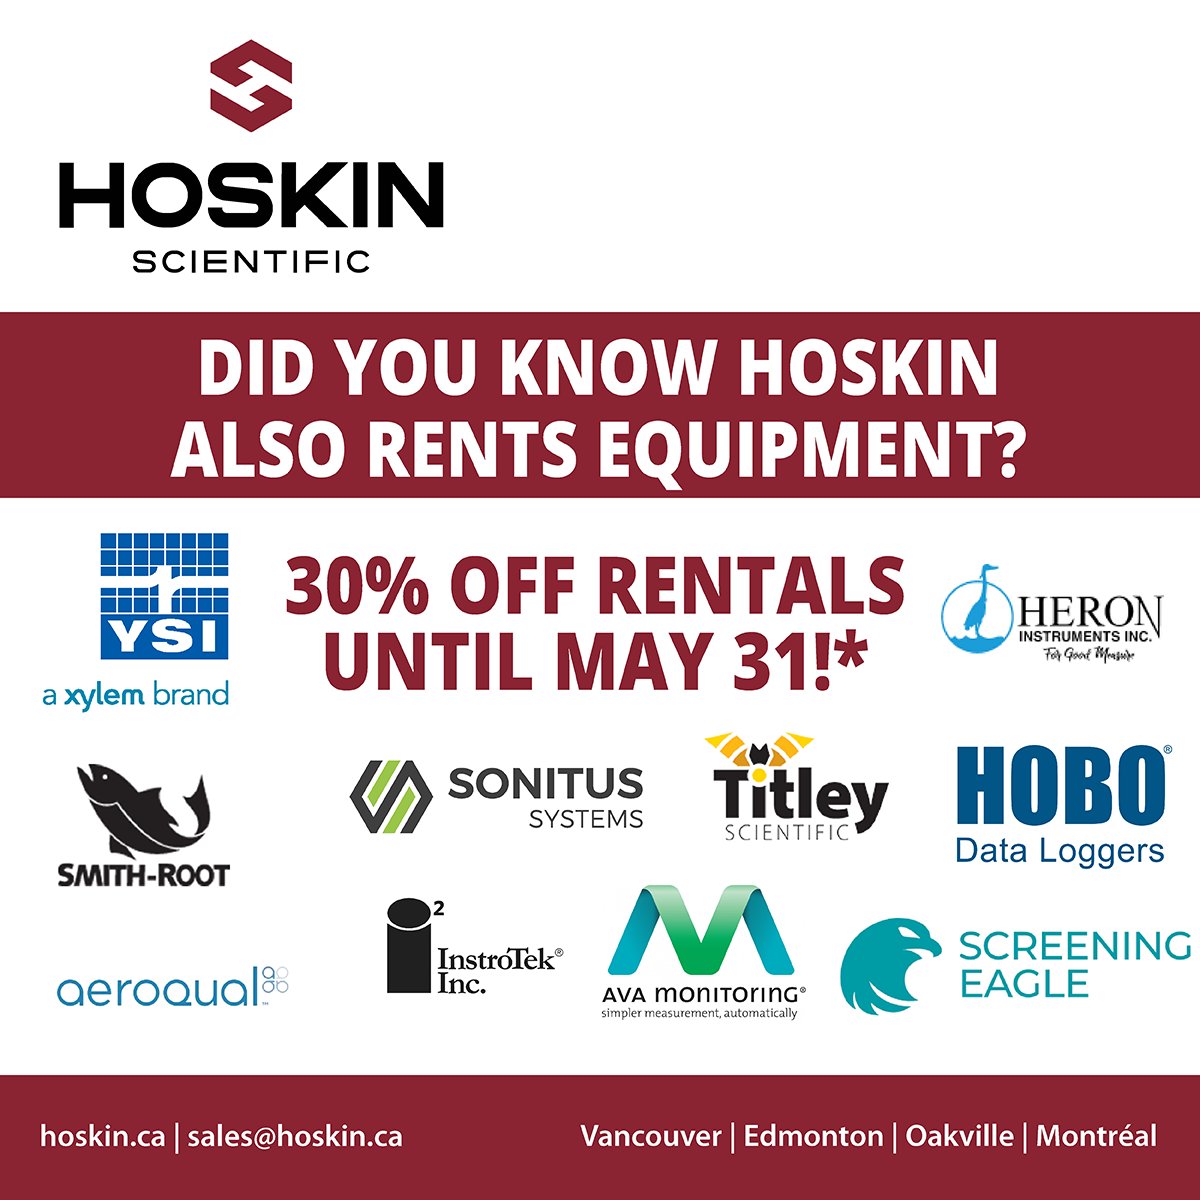 HOSKIN HAS RENTALS!
From now until the end of May we're offering 30% off your next rental *
* Water Level Meters
* Groundwater Pumps
* Water Quality Meters
* Gas Detectors
* Air Quality Instrumentation
* Noise and Vibration Monitors
hoskin.ca/category/renta…
*conditions apply